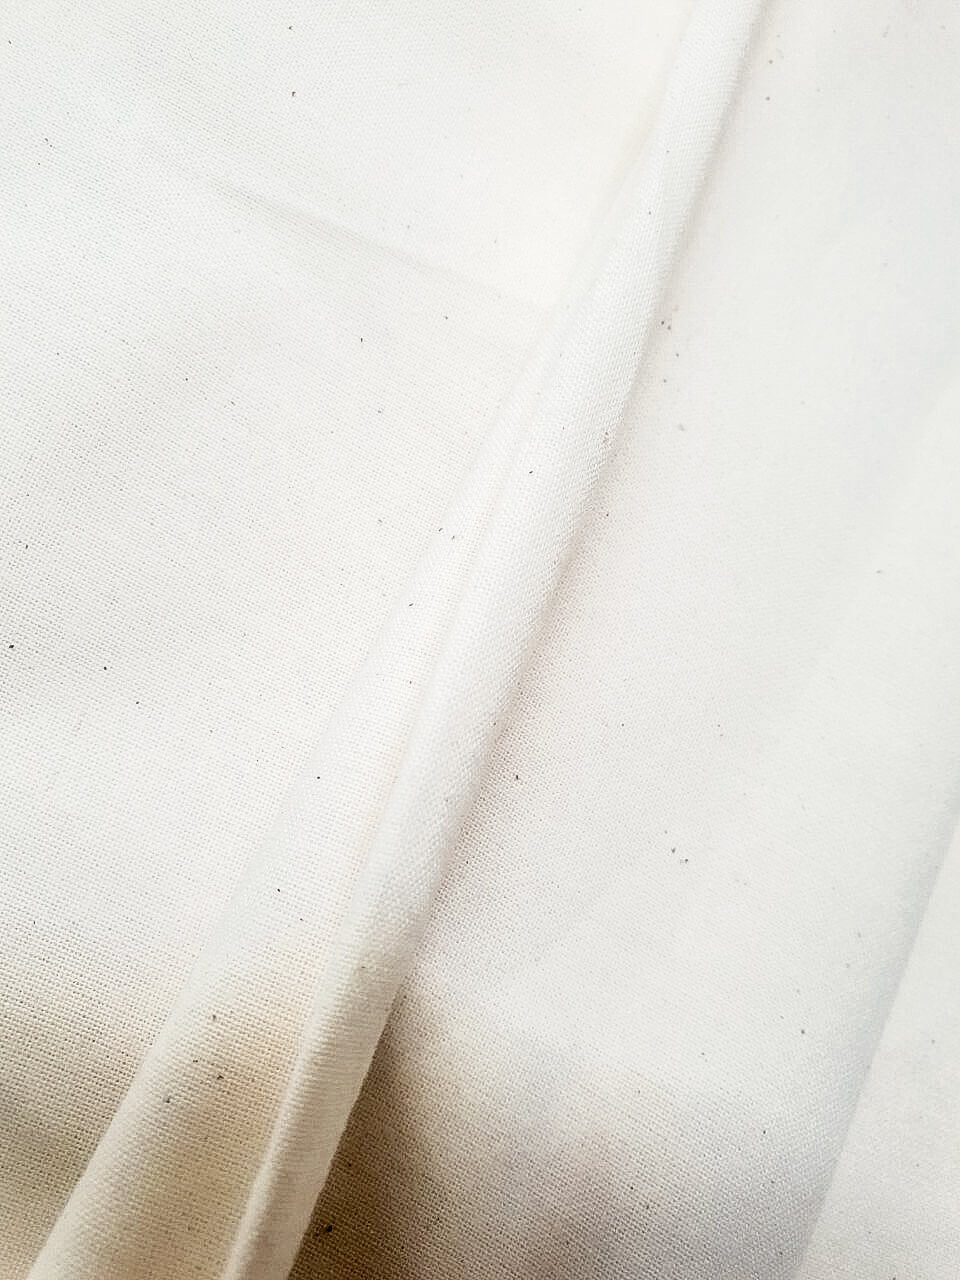 100% recycled cotton medium weight calico fabric 156gsm UK sustainable material ADKN hobbycraft sewing fabric for dressmaking